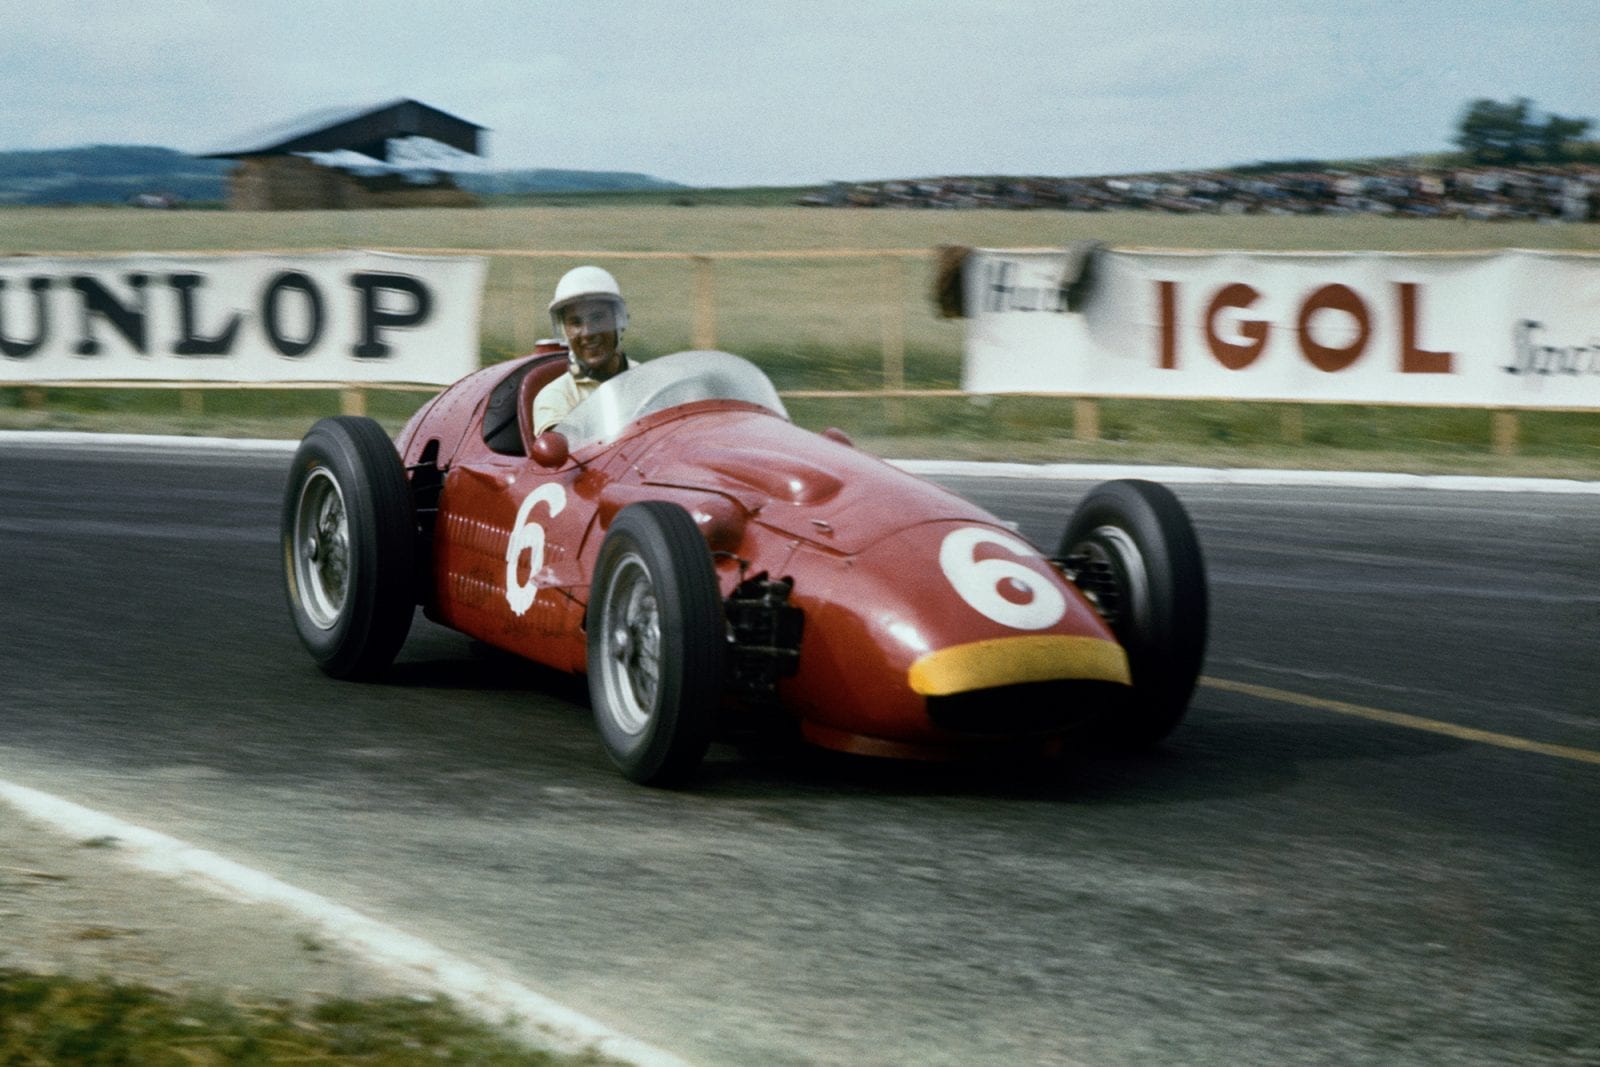 Stirling Moss (Maserati 250F), on his way to 5th place at the 1956 French Grand Prix, Reims.